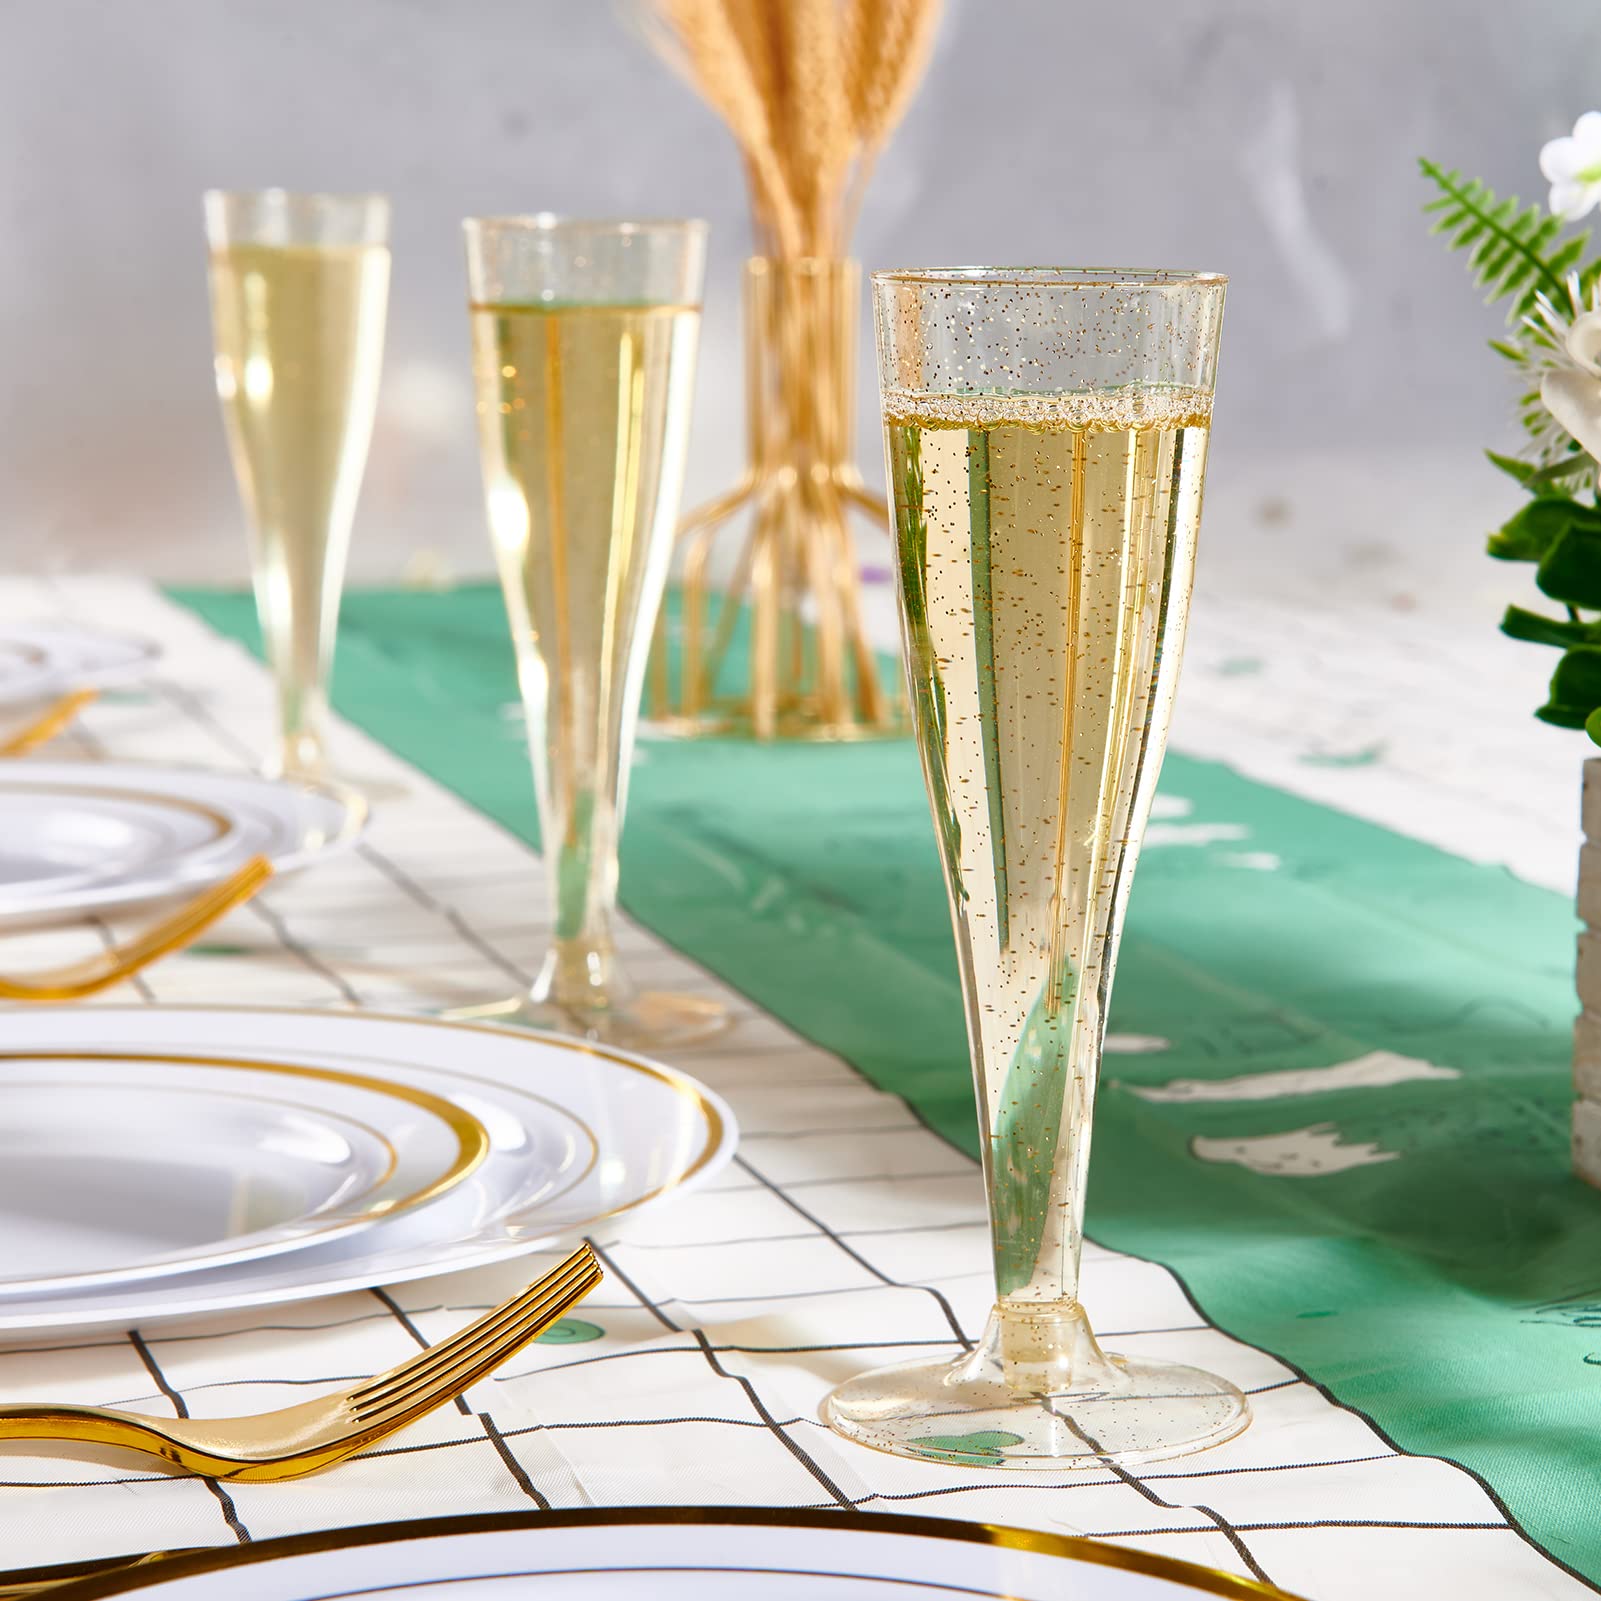 FOCUSLINE 100 Pack Plastic Champagne Flutes, 4.5 Oz Gold Glitter Plastic Champagne Glasses, Disposable Clear Toasting Glasses Recyclable Plastic Champagne Cups for Wedding Party